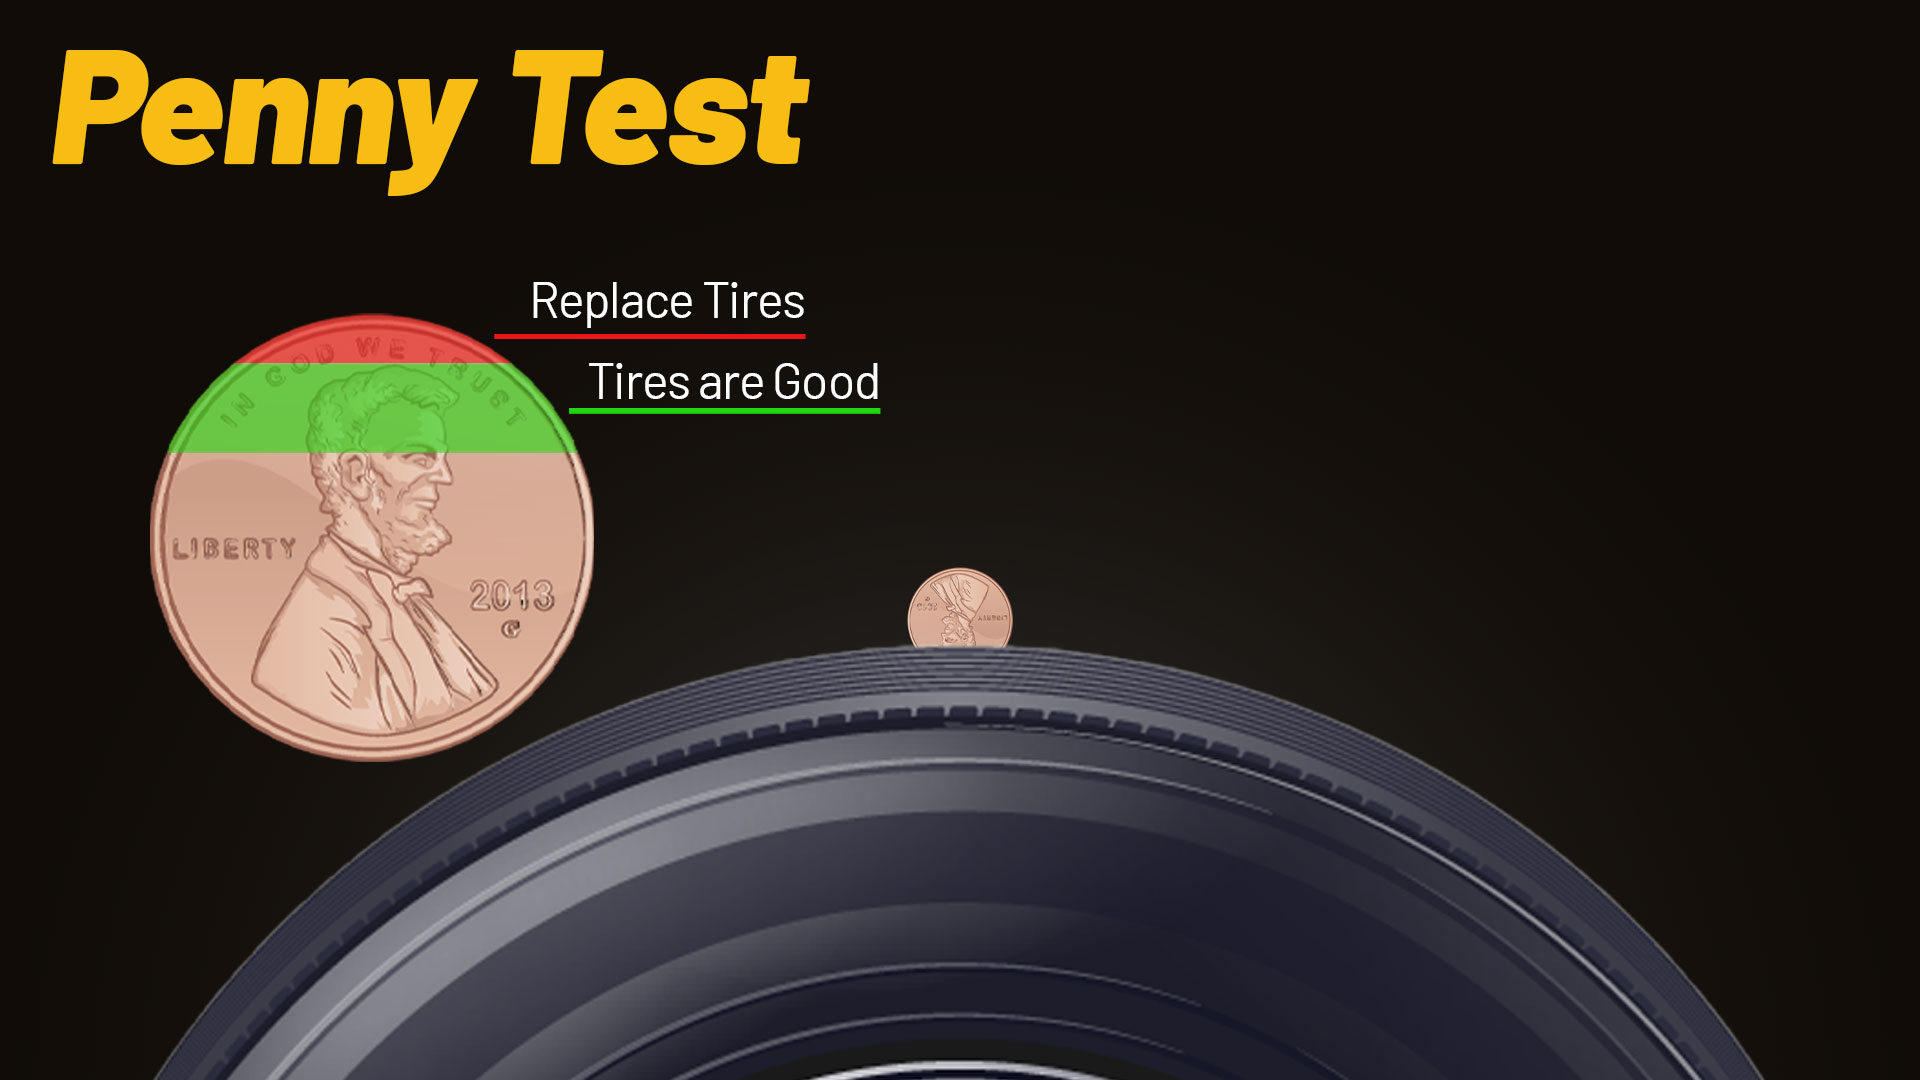 How to measure tread depth with a penny